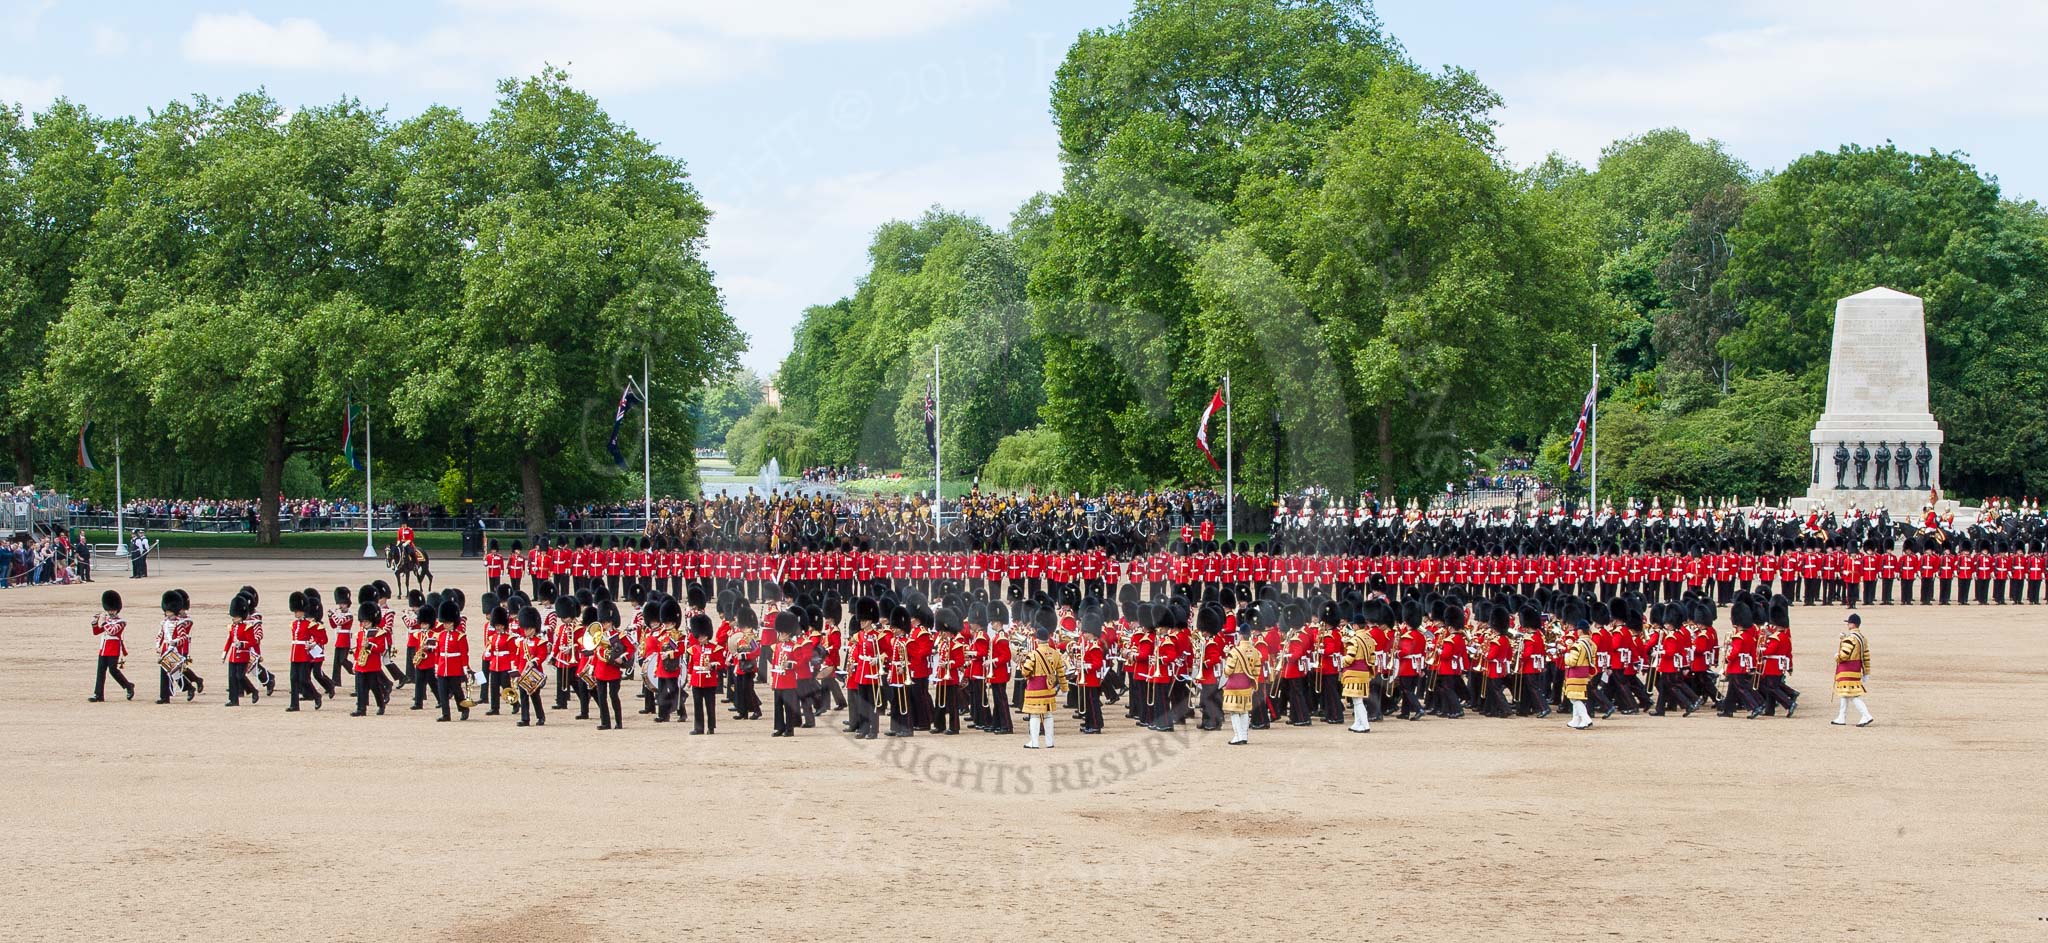 The Colonel's Review 2013: The Massed Band march away to leave room for  the Mounted Bands..
Horse Guards Parade, Westminster,
London SW1,

United Kingdom,
on 08 June 2013 at 11:49, image #715